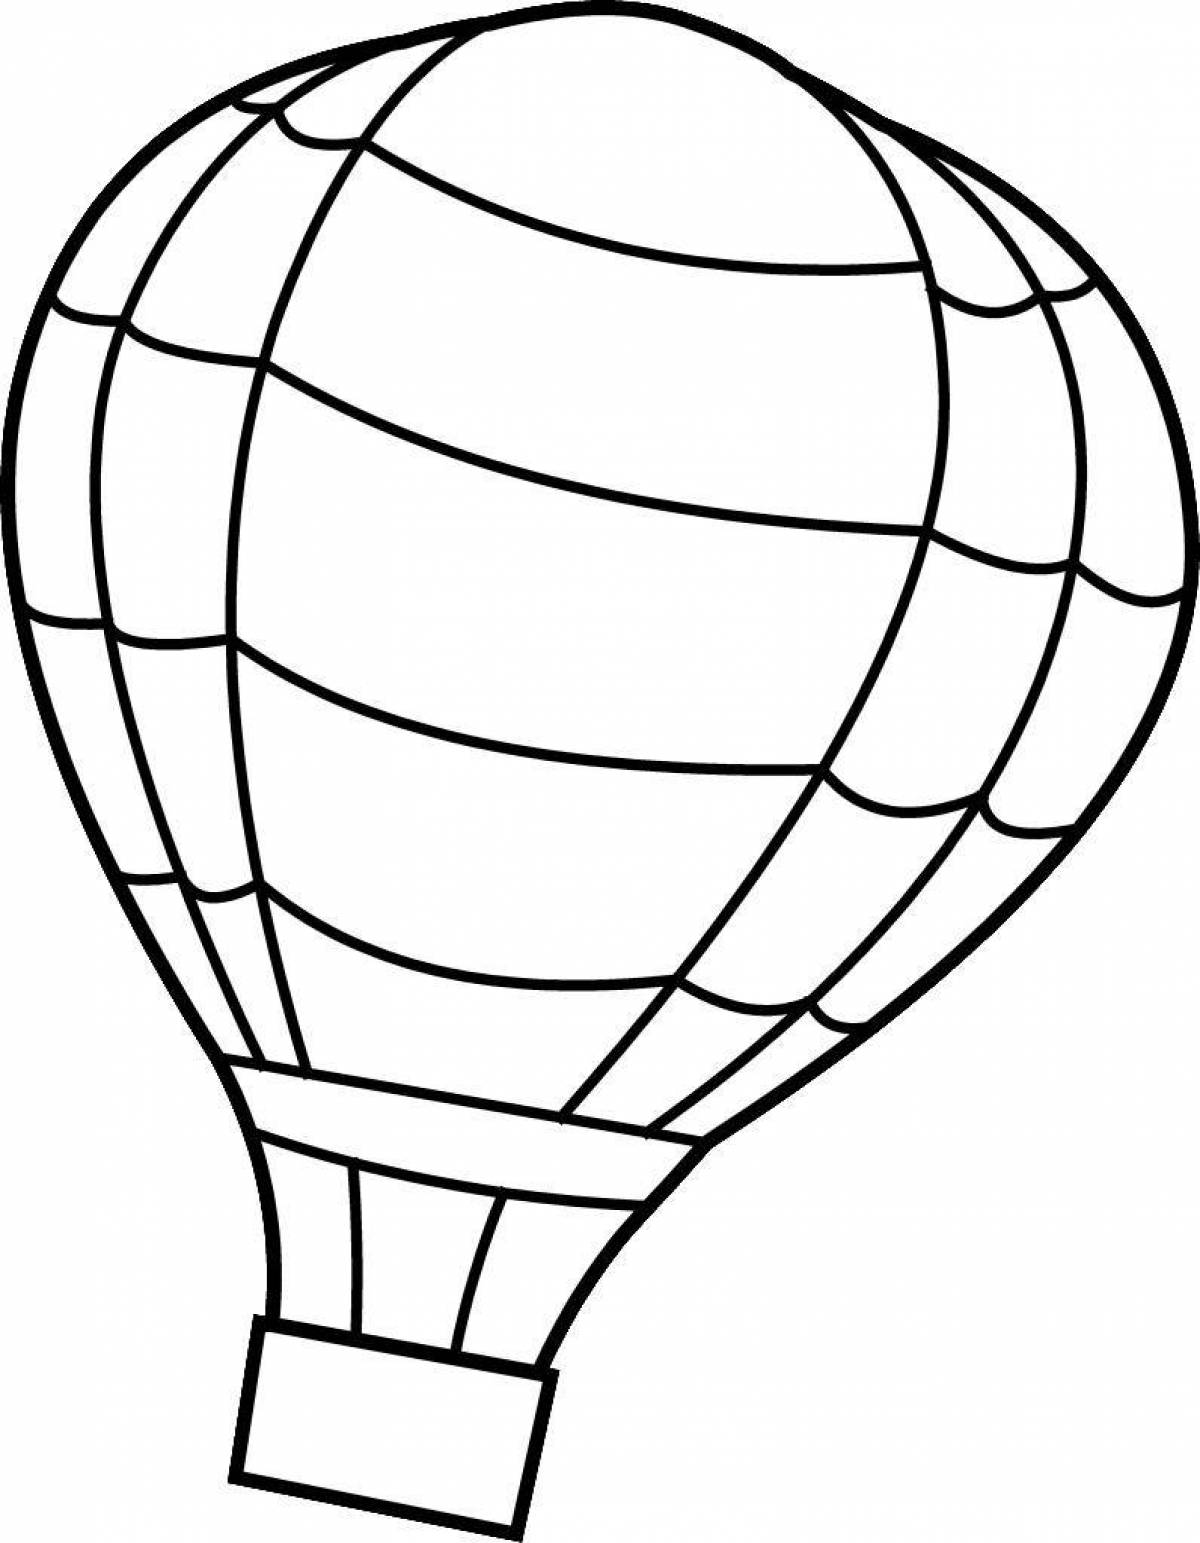 Coloring page glamor balloon with a basket